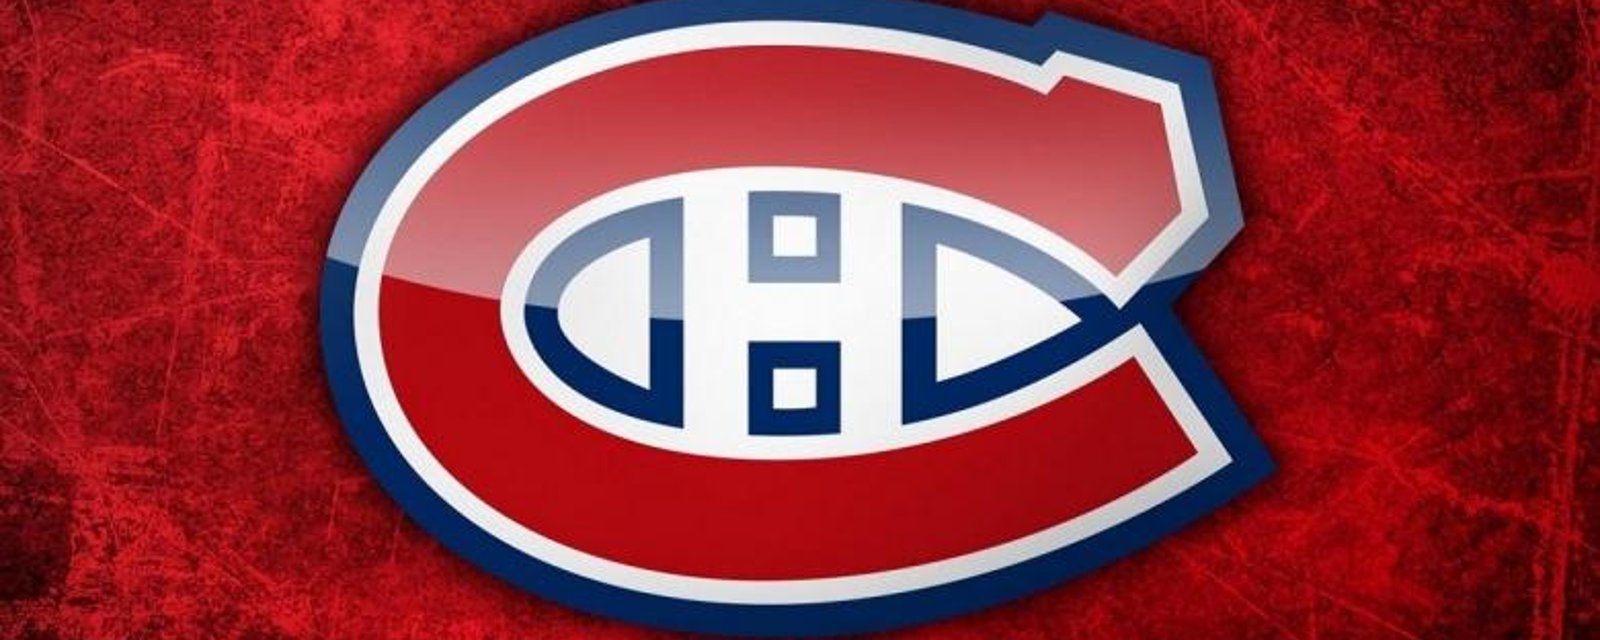 Report: Canadiens reveal they have a major announcement coming very soon.